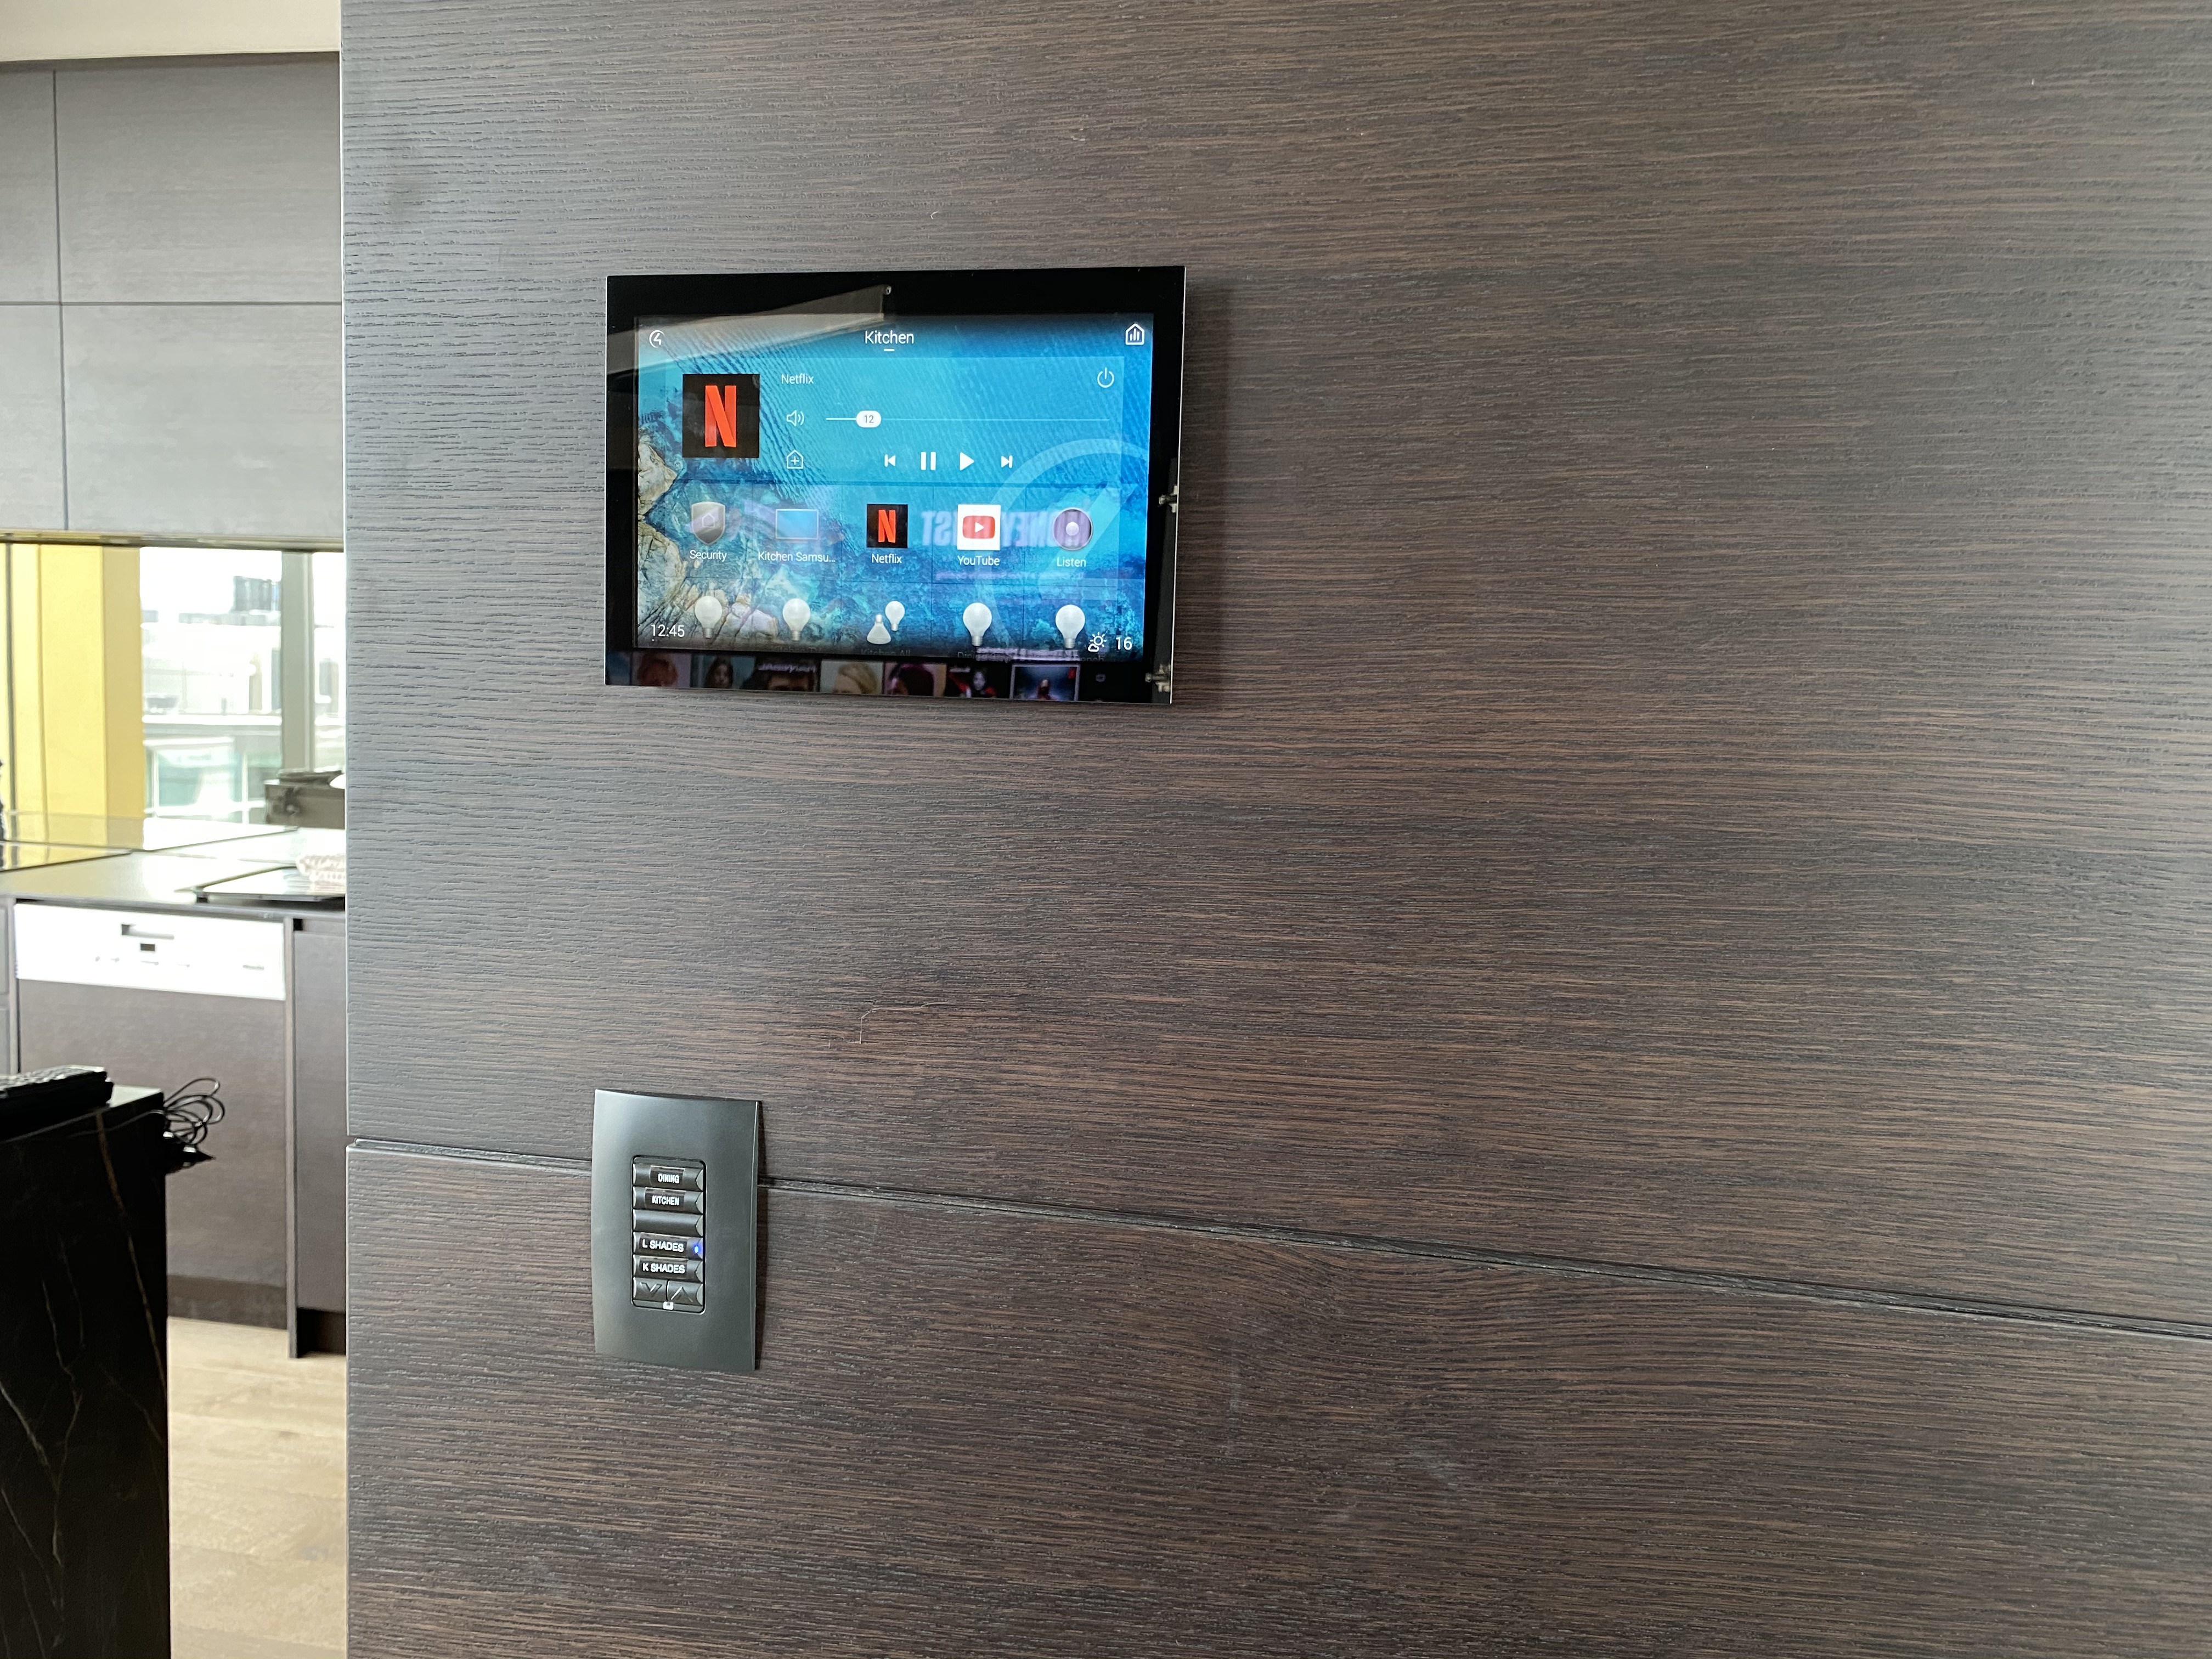 Black tablet displaying Control 4 interface for a house.